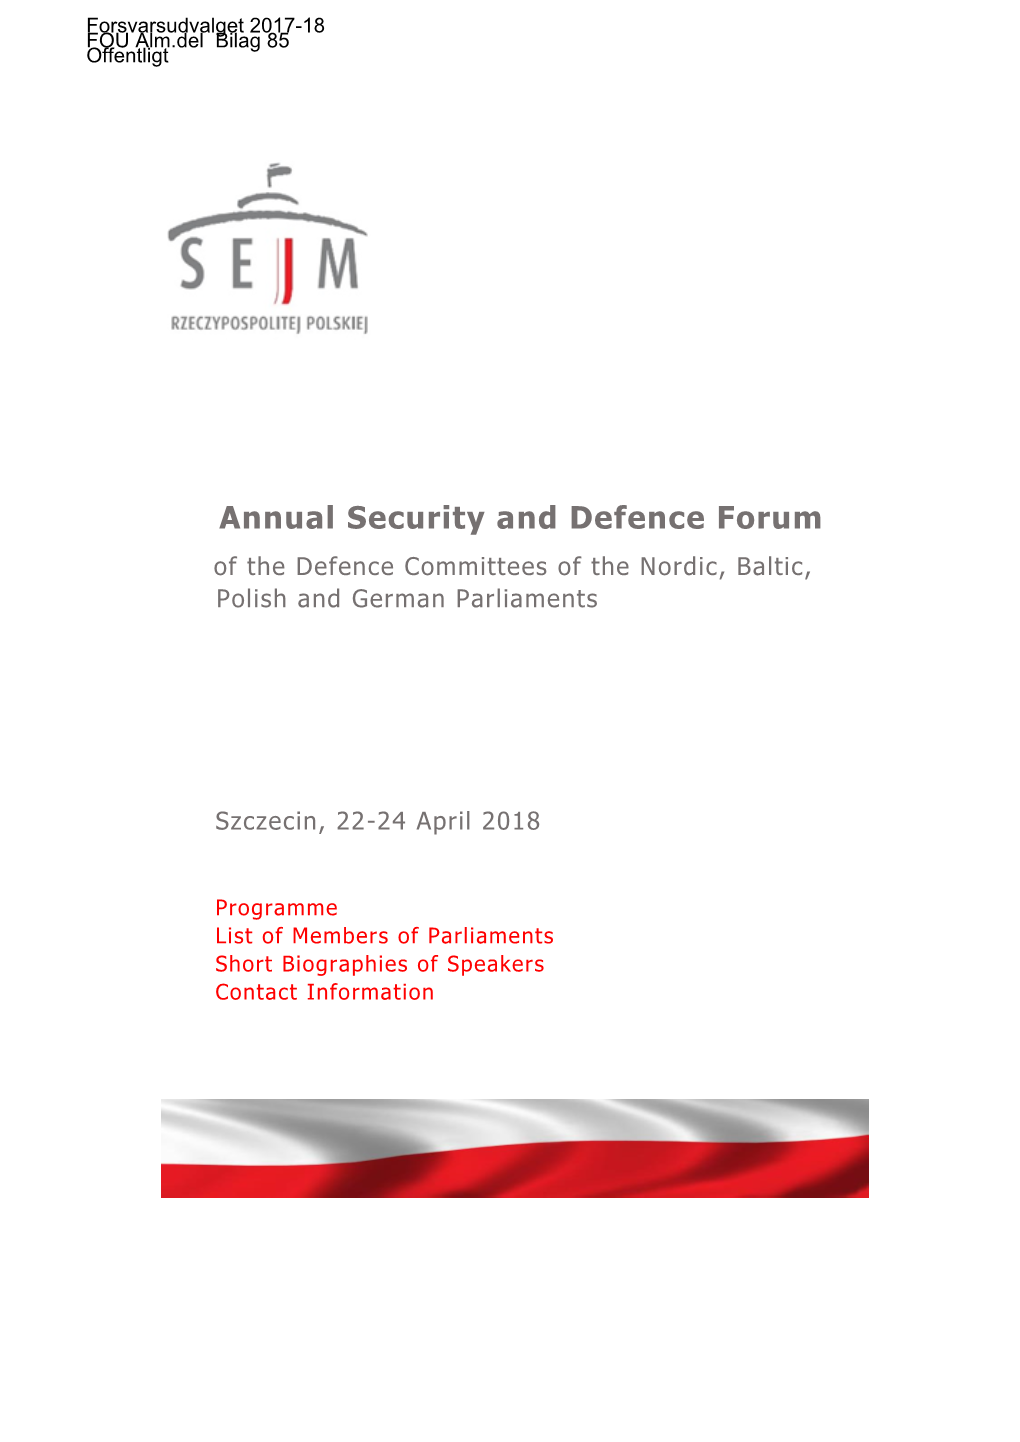 Annual Security and Defence Forum of the Defence Committees of the Nordic, Baltic, Polish and German Parliaments